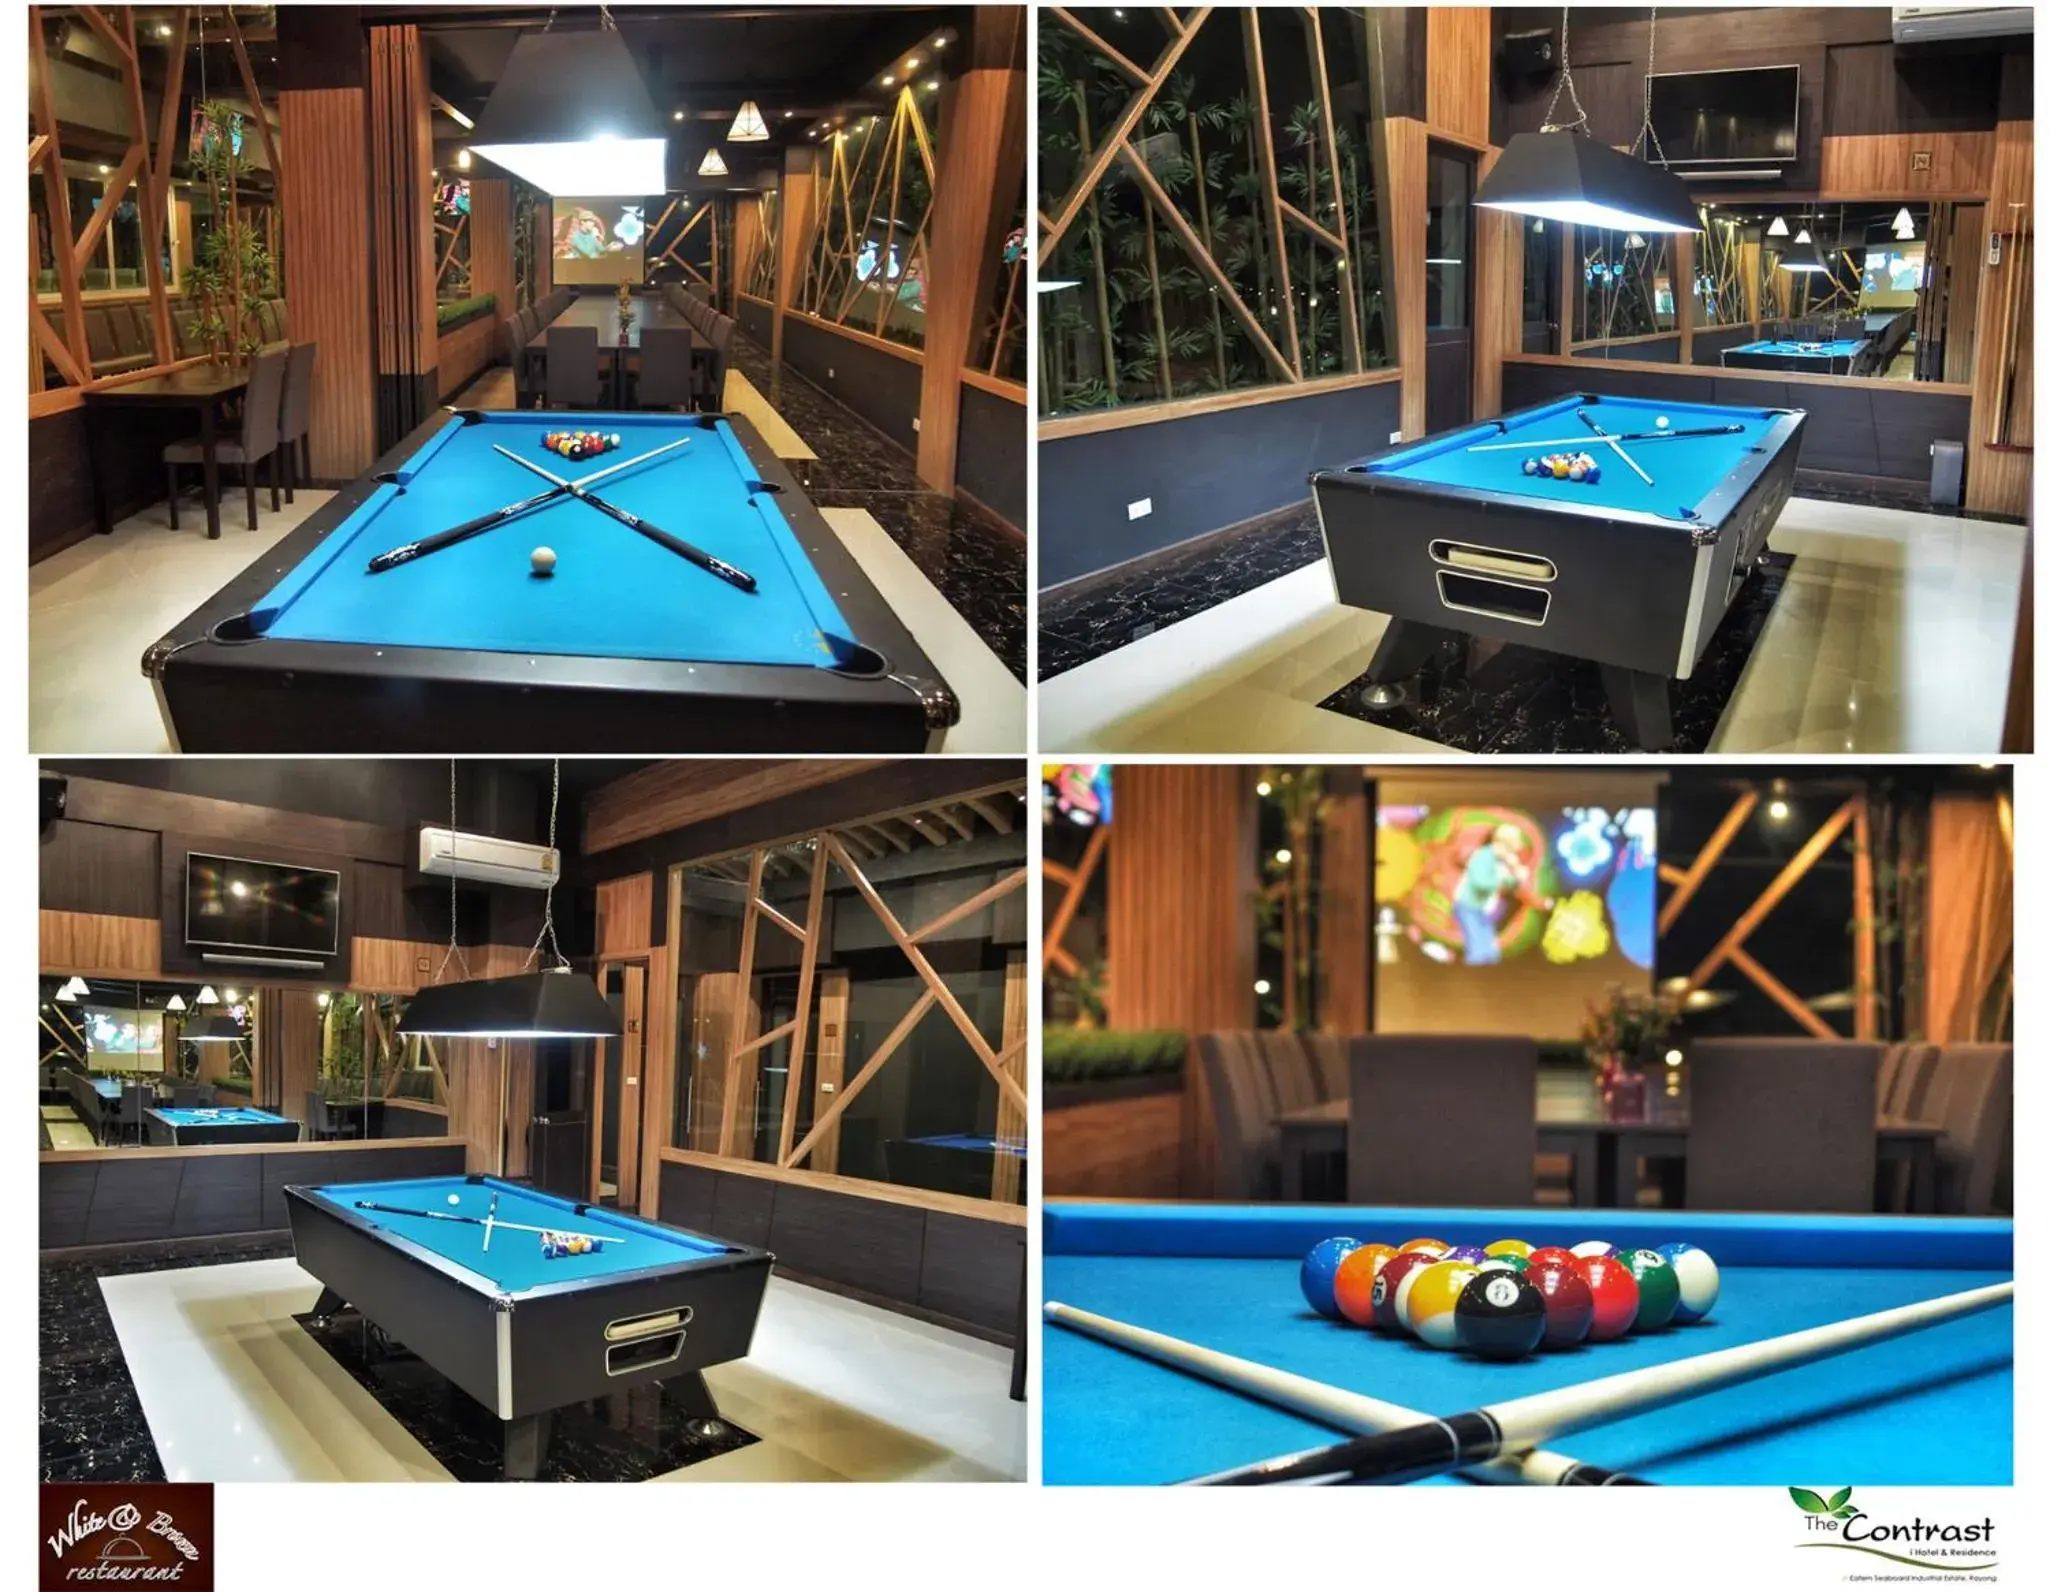 Sports, Billiards in The Contrast i Hotel